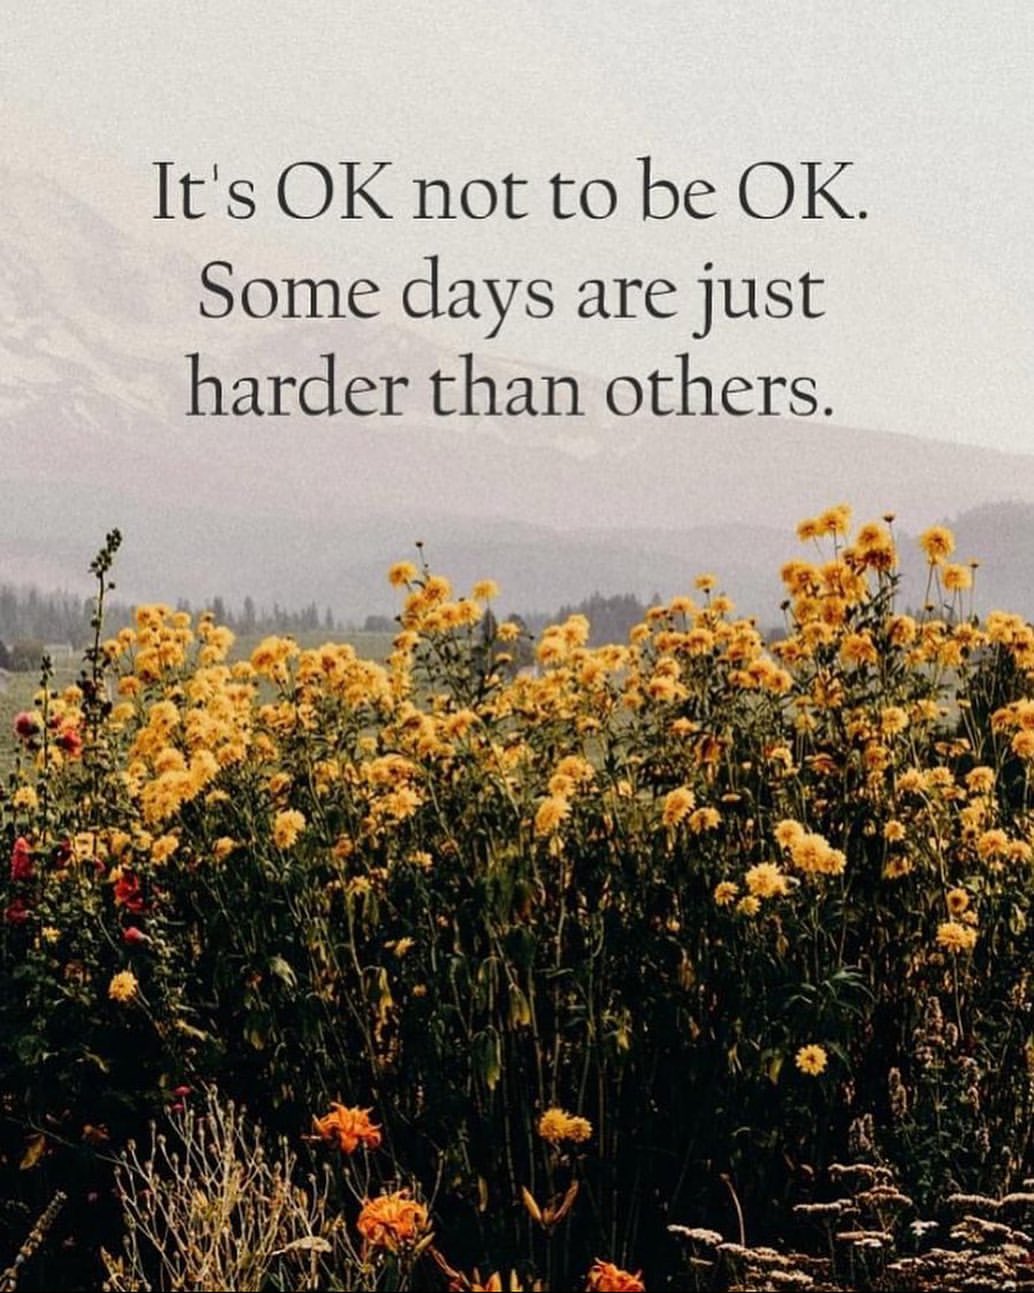 It's ok not to be ok. Some days are just harder than others. - Phrases